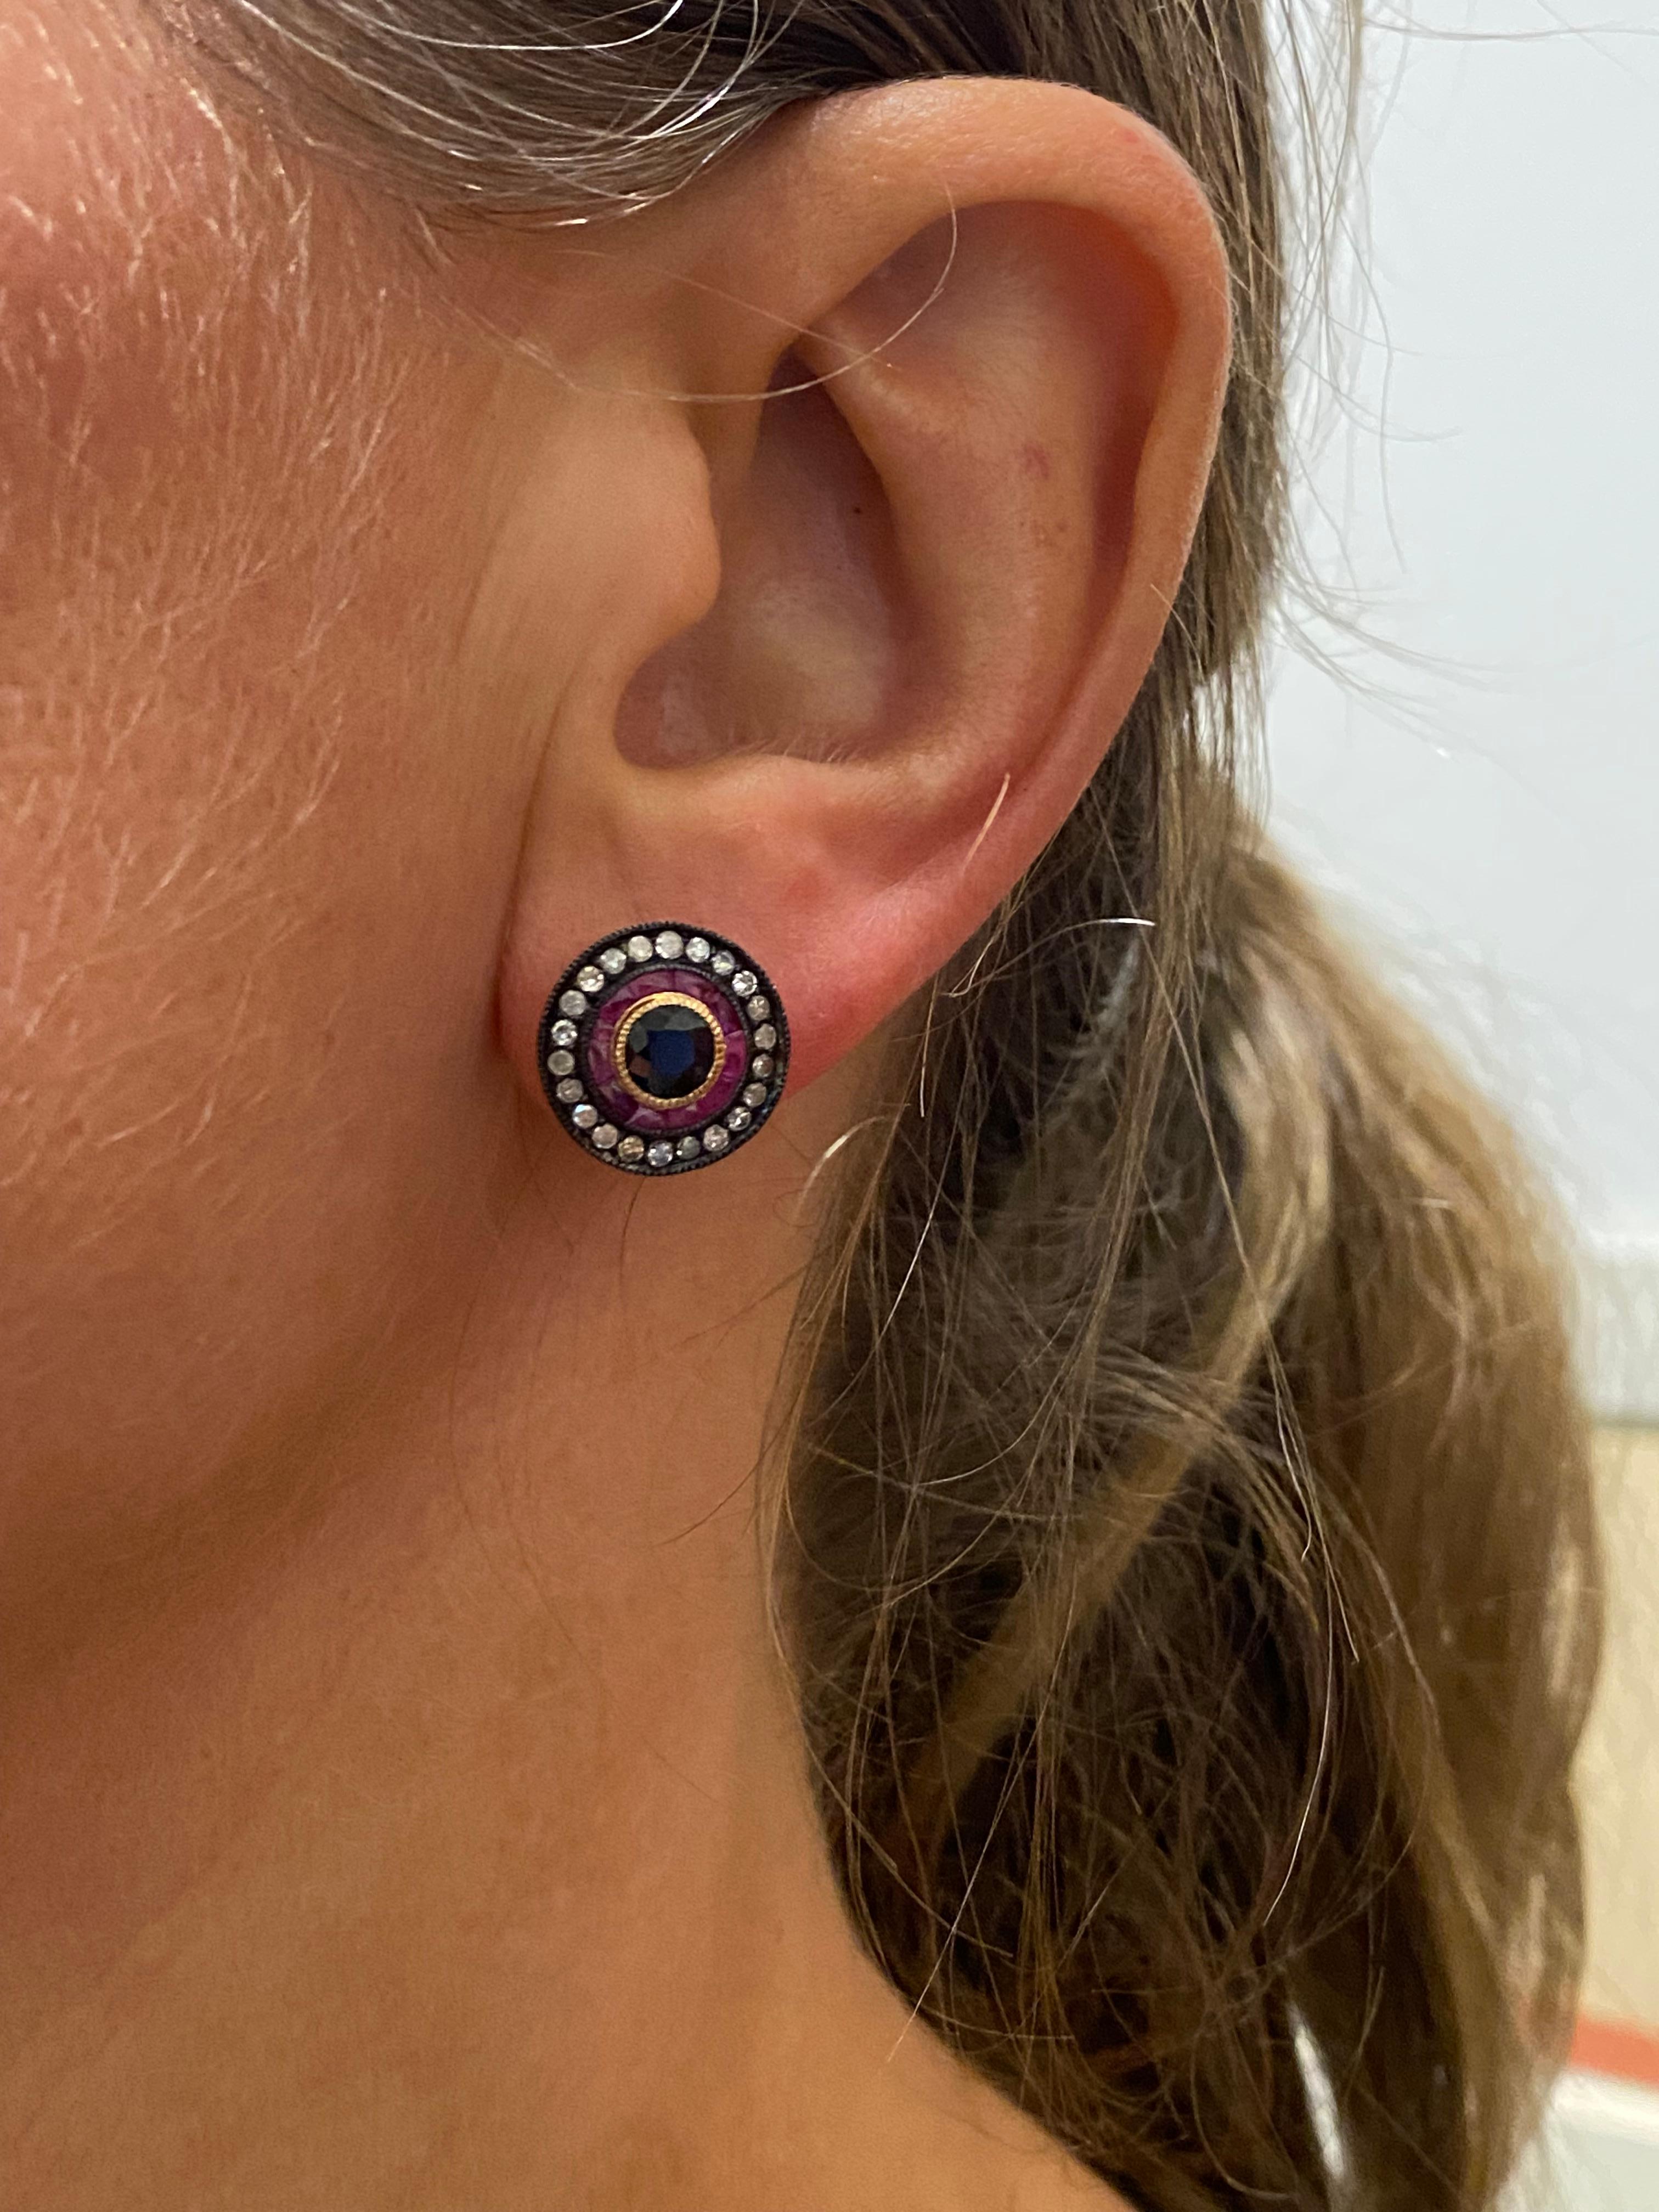 Striking & stylish these vintage studs were 
meticulously crafted in 9K Rose Gold

Each is feating a 0.60ct 
Natural Midnight Blue Sappphire,
bezel set & 
surrounded by the row of caliber cut 
natural rubies of pinkish red colour, 

Further